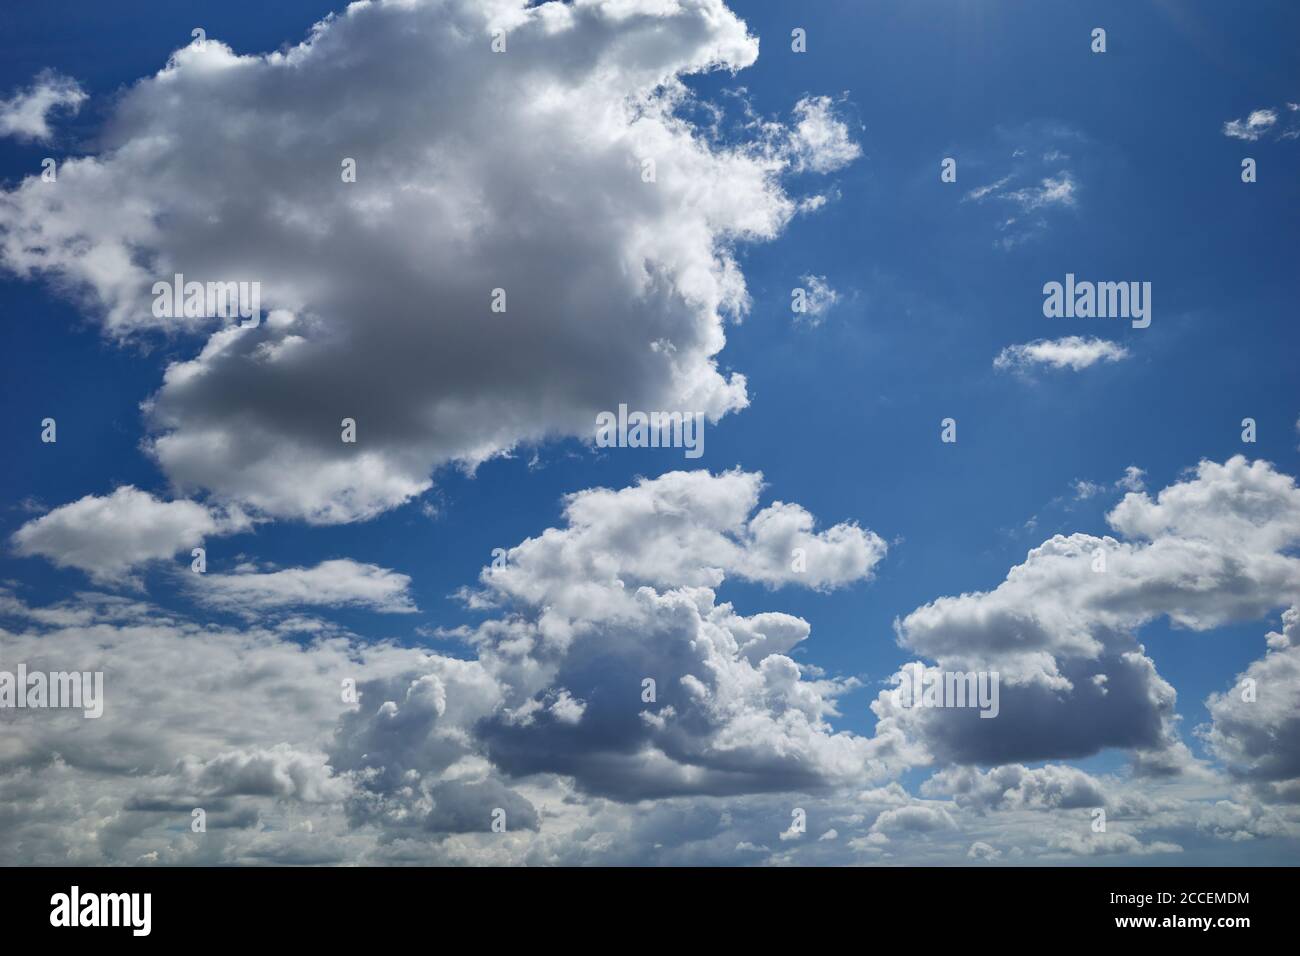 Dreamlike heaven. Amazing clouds are flying in the blue sky. Fluffy, puffy, cotton-like clouds. Background for forecast and meteorology illustration Stock Photo